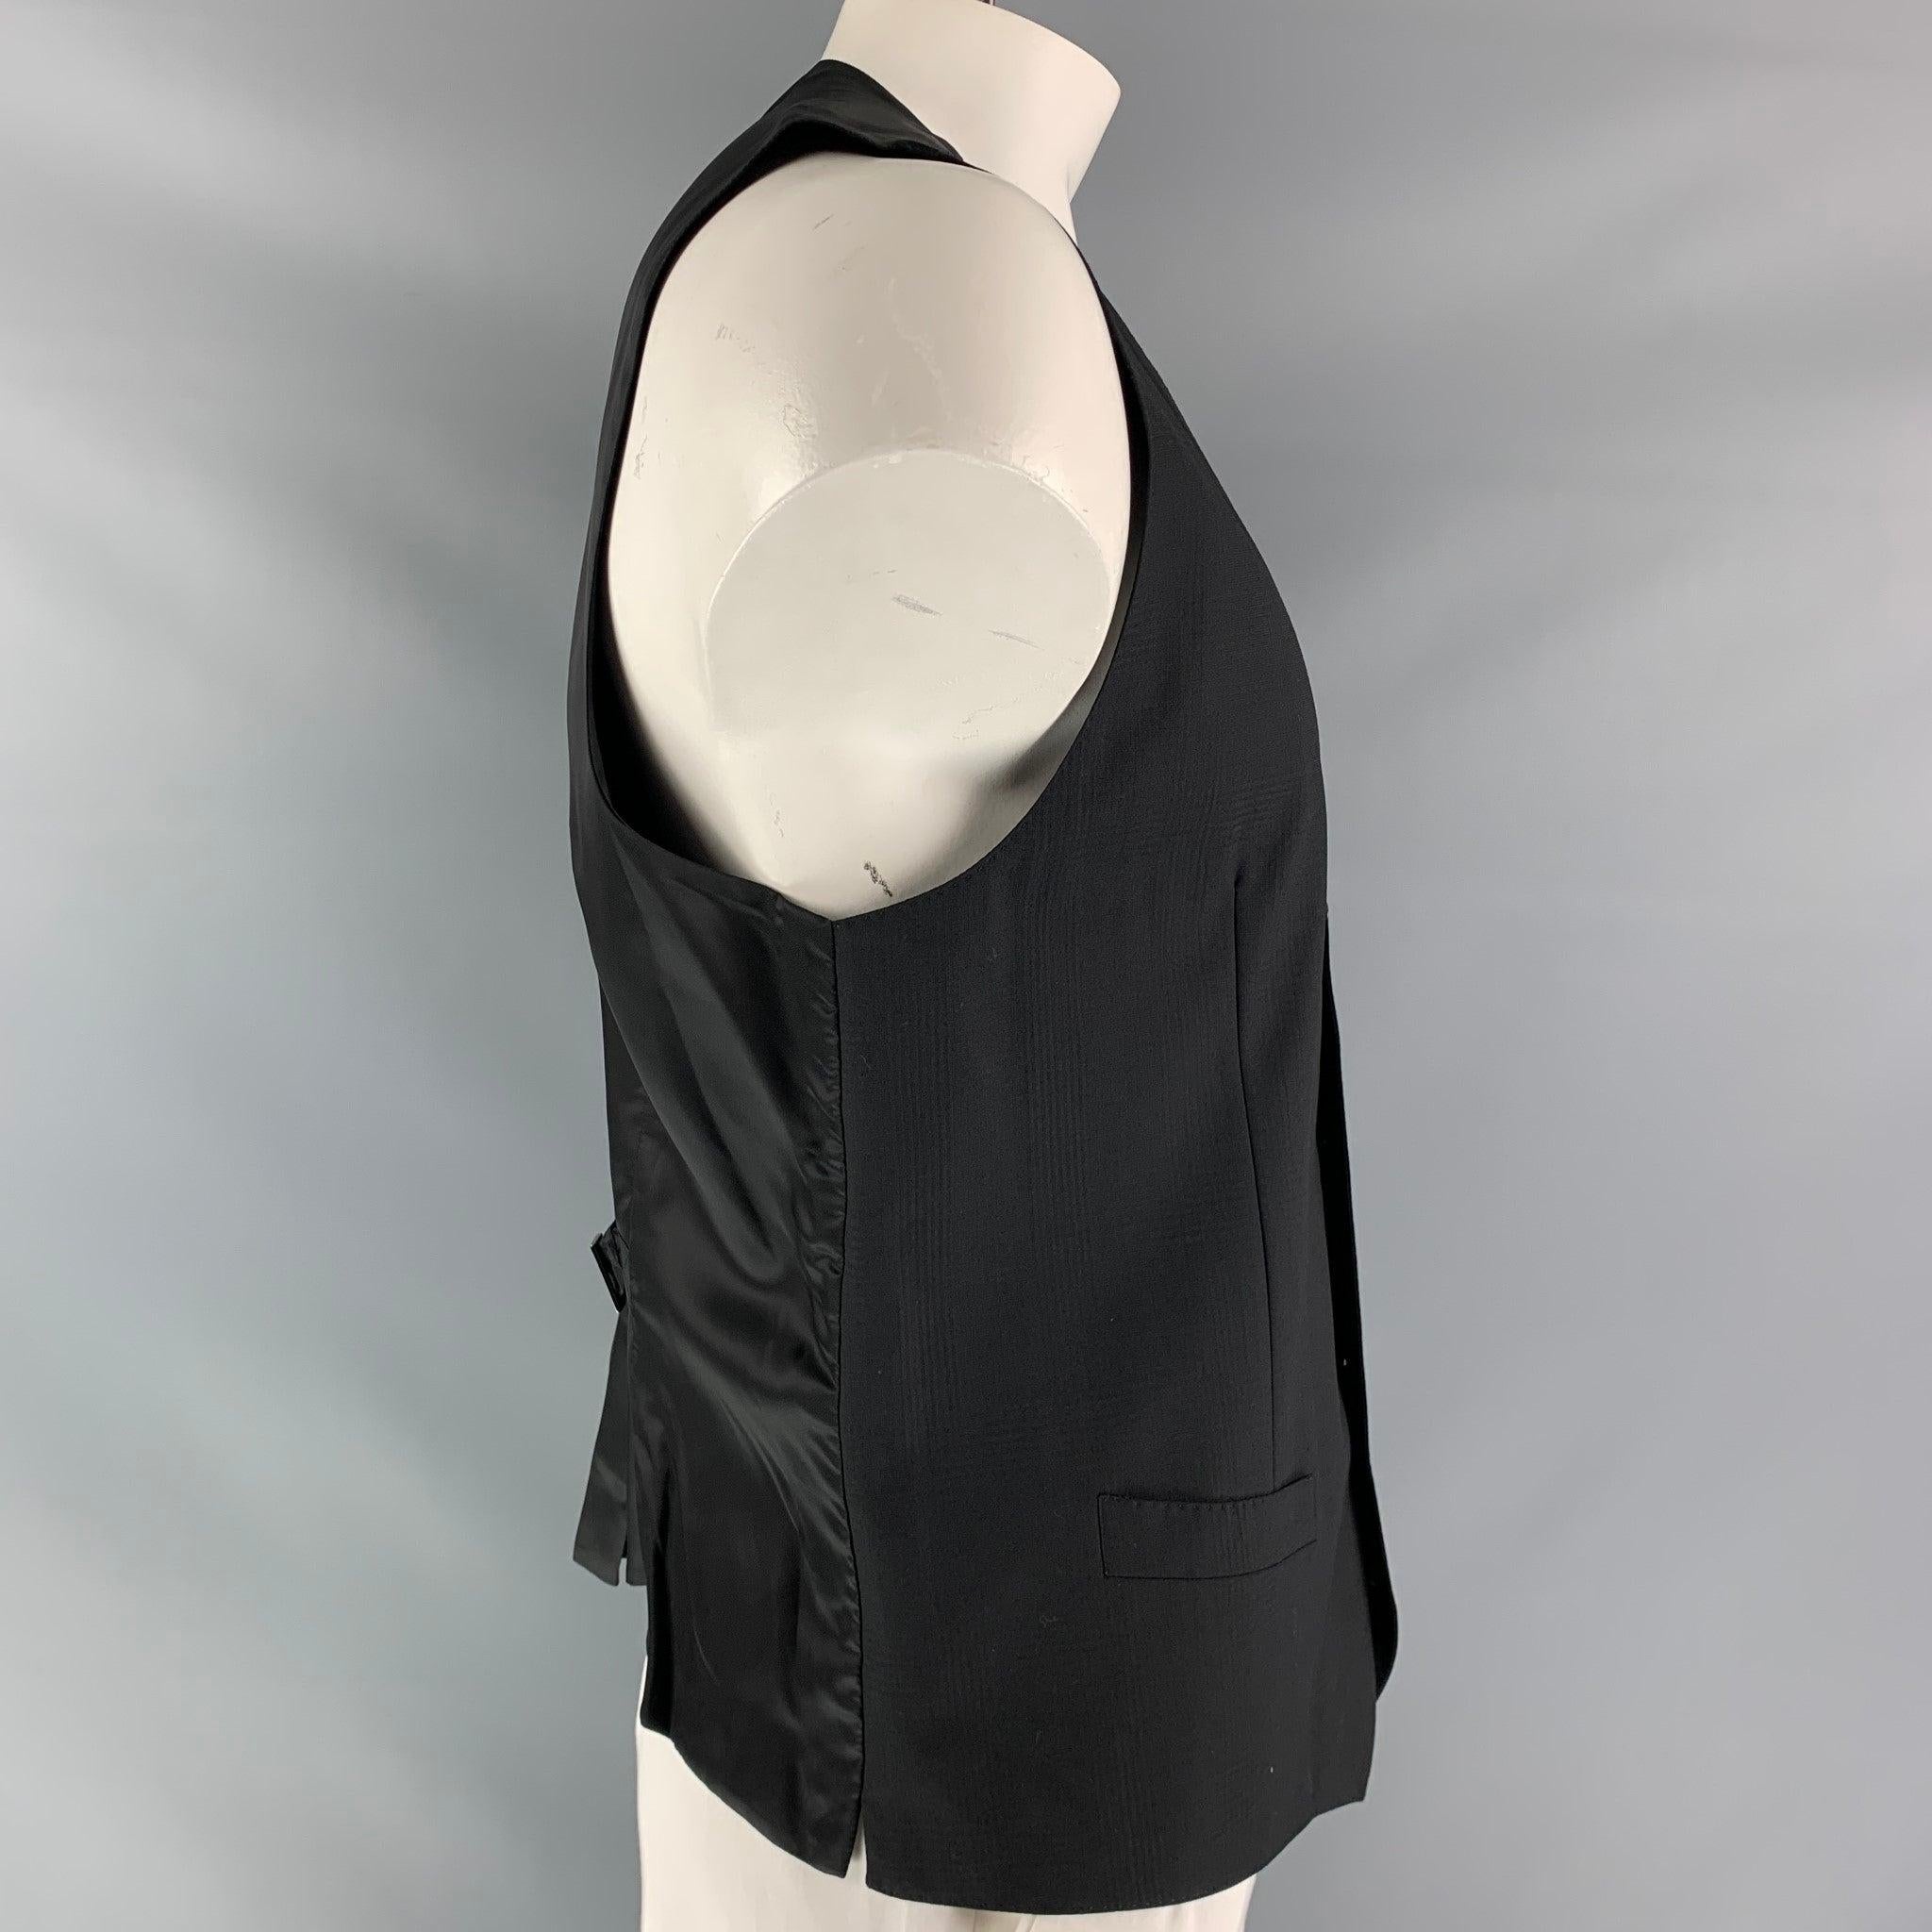 DOLCE & GABBANA dress vest comes in a black plaid wool fabric, full lined featuring V-neck, welt pockets, five buttons down closure, black viscose fabric back and adjustable sliding belt. Made in Italy.Excellent Pre-Owned Condition.  

Marked:   no